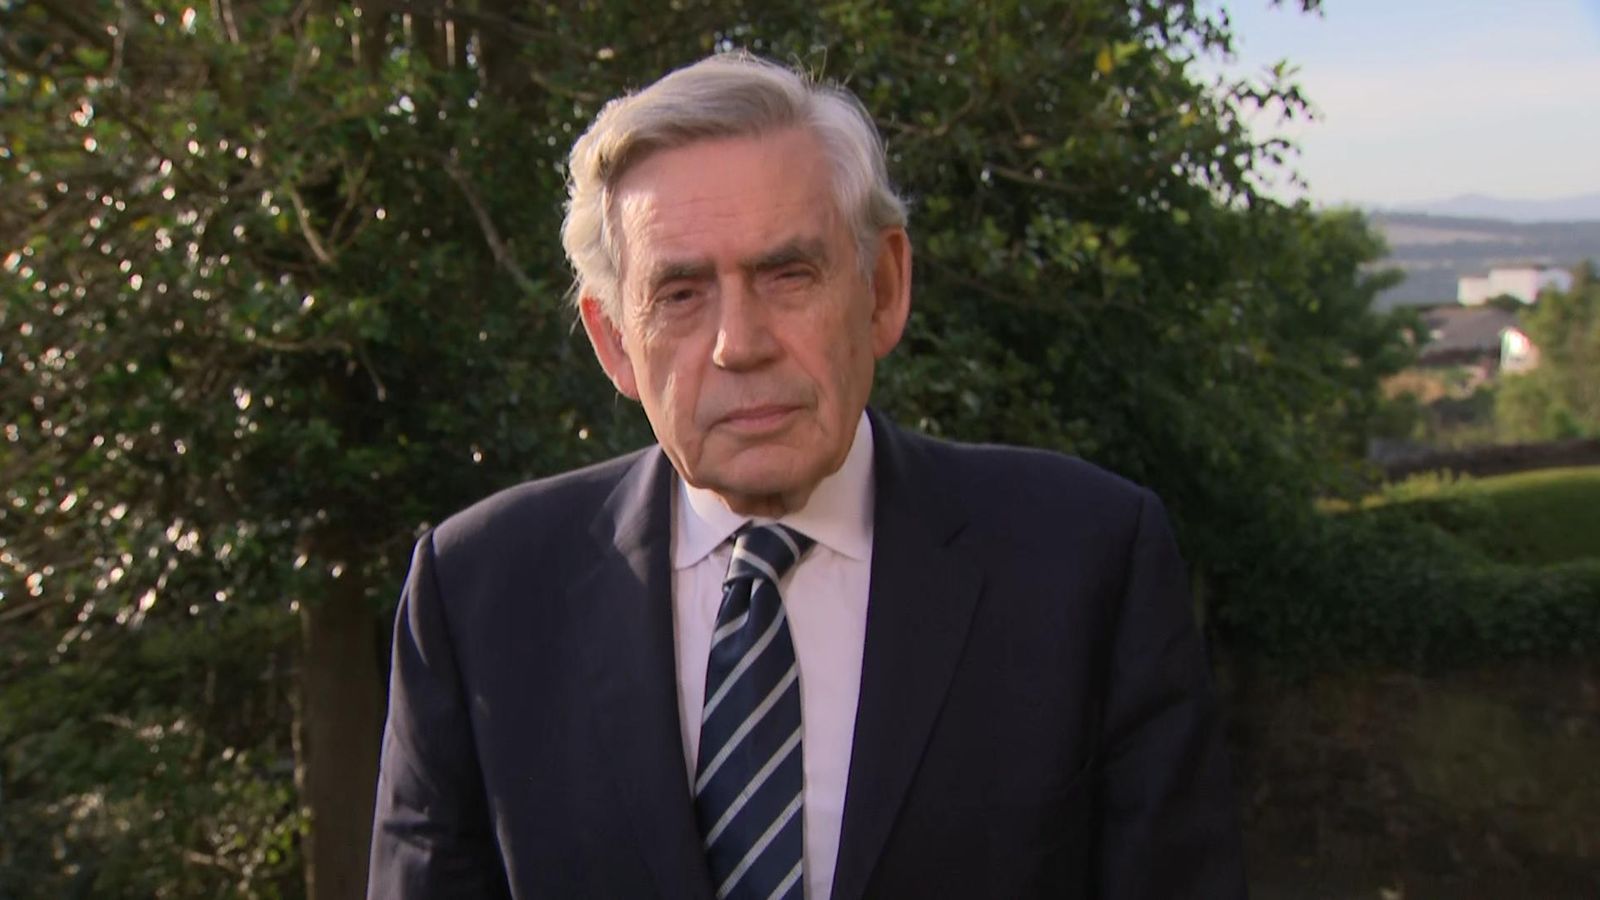 Nearly 50,000 sign petition backing Gordon Brown's call for emergency budget to tackle cost of living